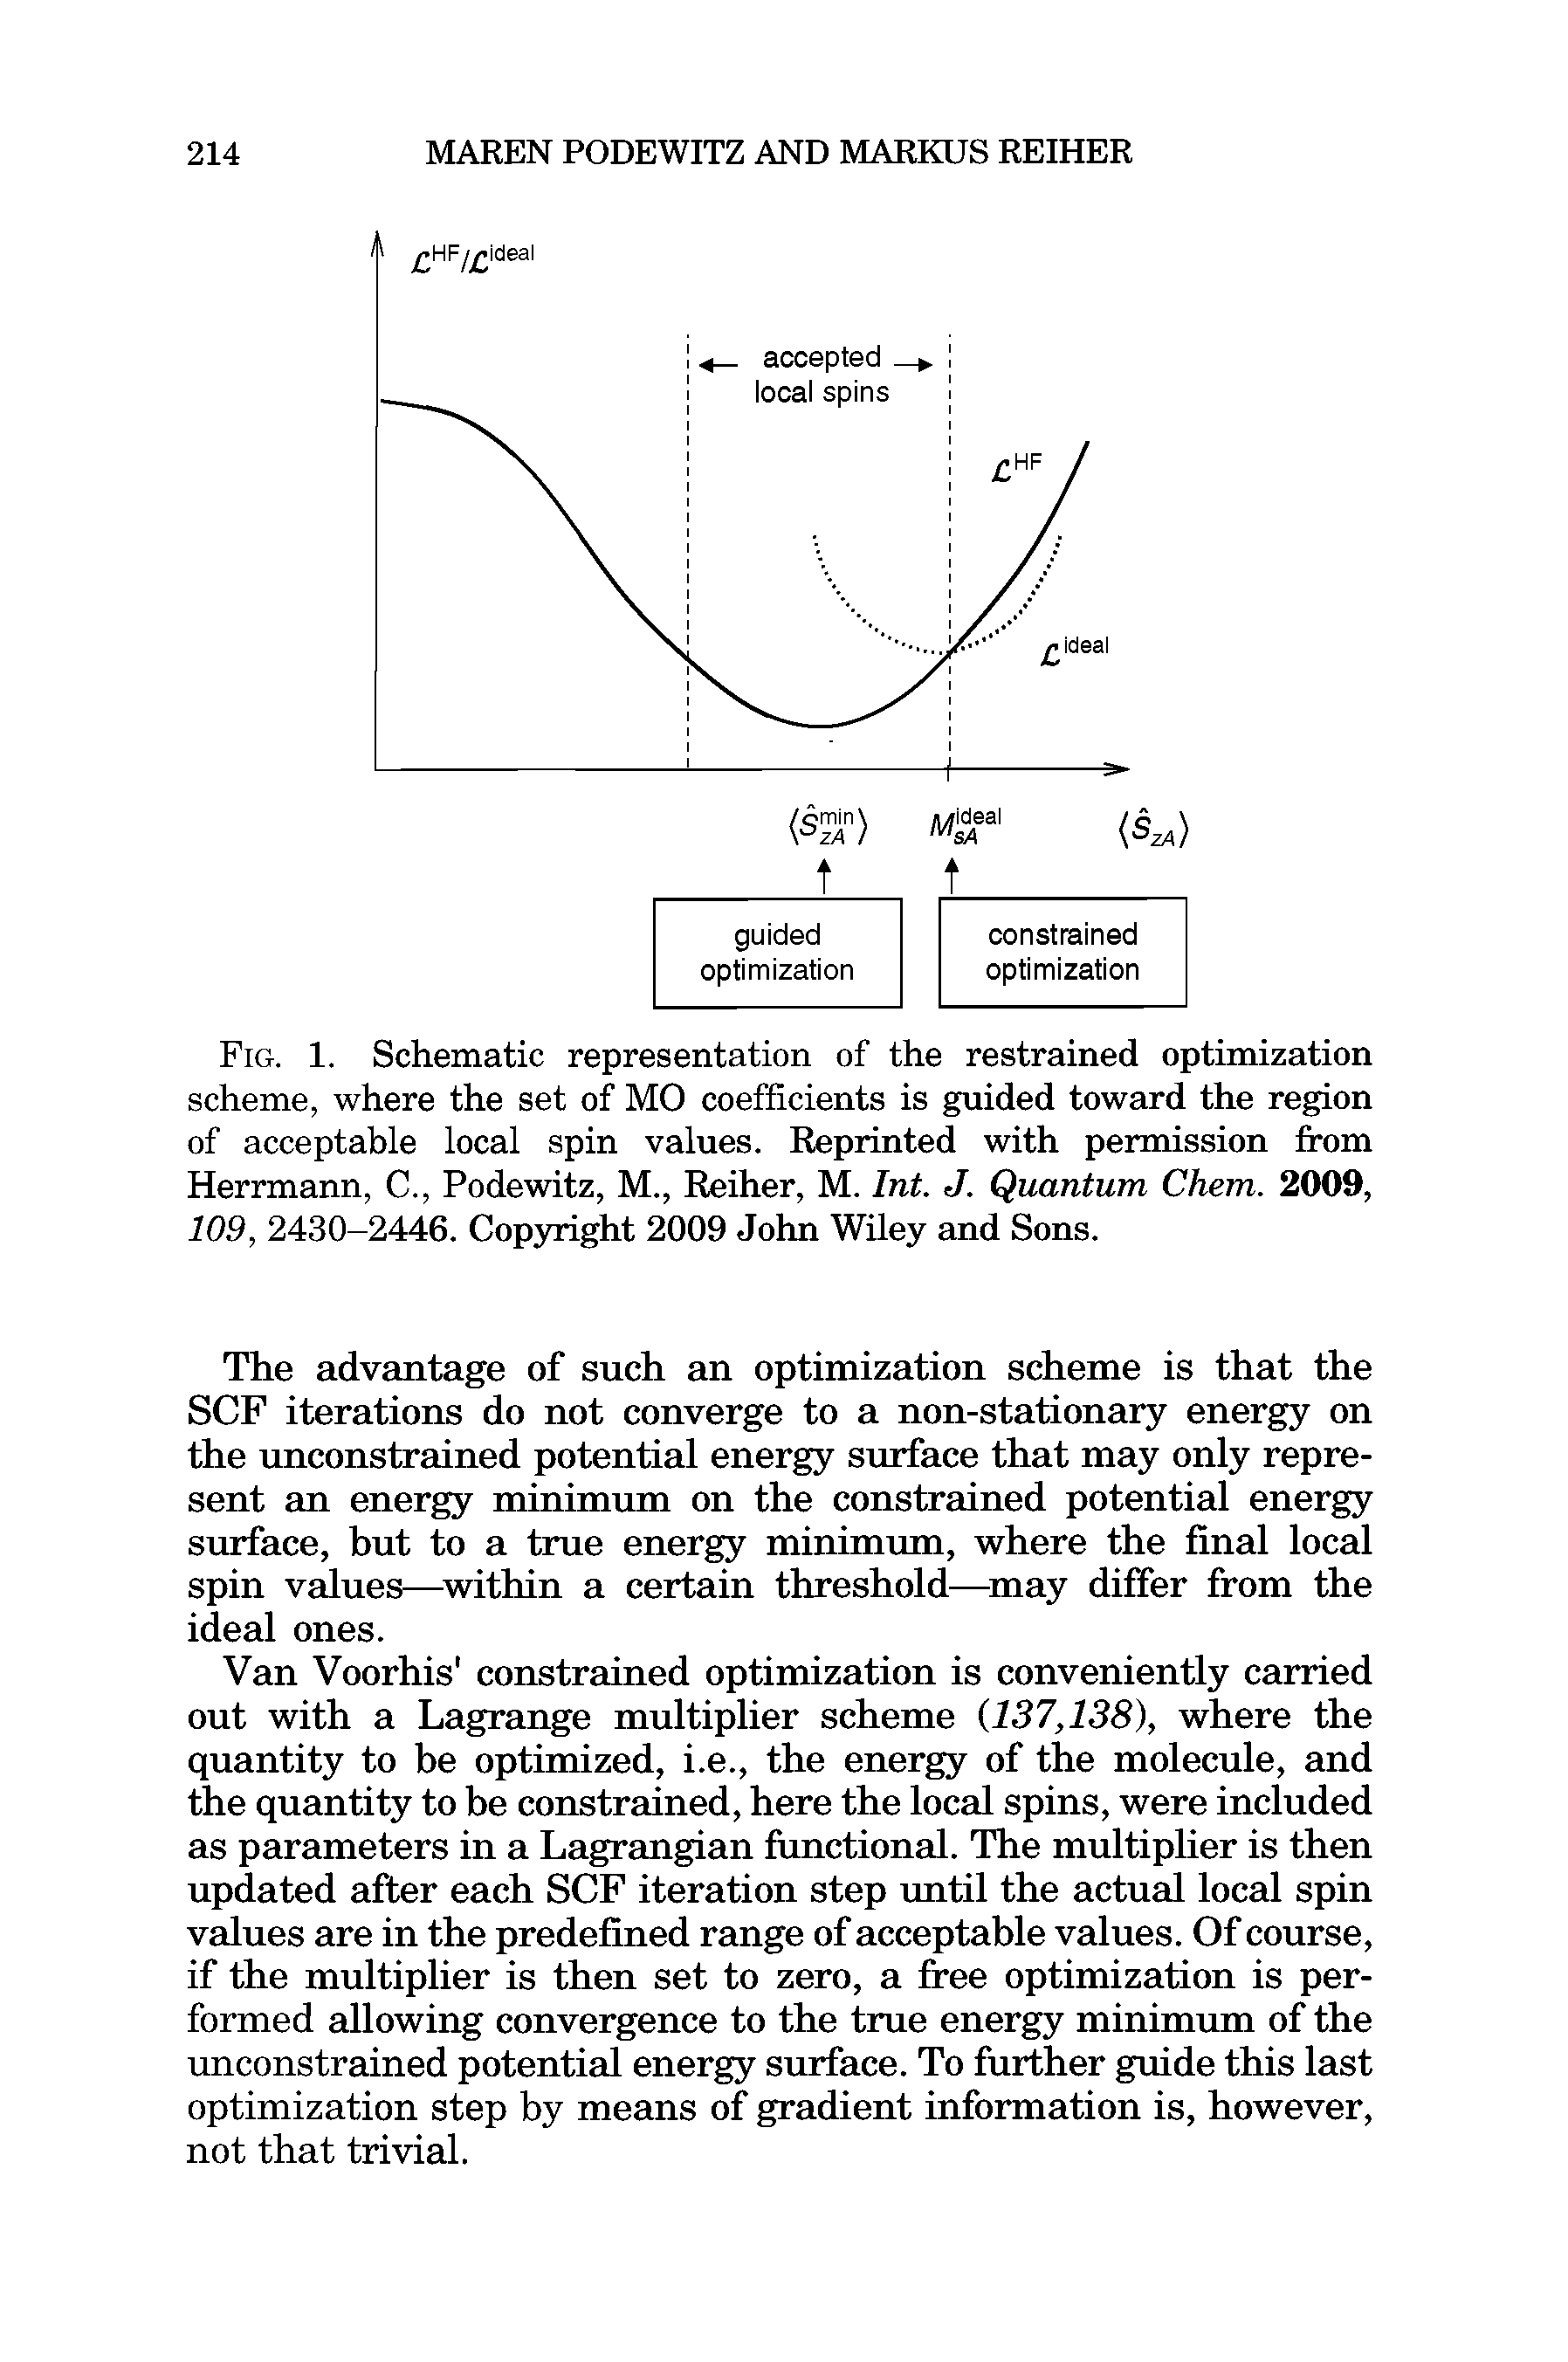 Fig. 1. Schematic representation of the restrained optimization scheme, where the set of MO coefficients is guided toward the region of acceptable local spin values. Reprinted with permission from Herrmann, C., Podewitz, M., Reiher, M. Int. J. Quantum Chem. 2009, 109, 2430-2446. Copyright 2009 John Wiley and Sons.